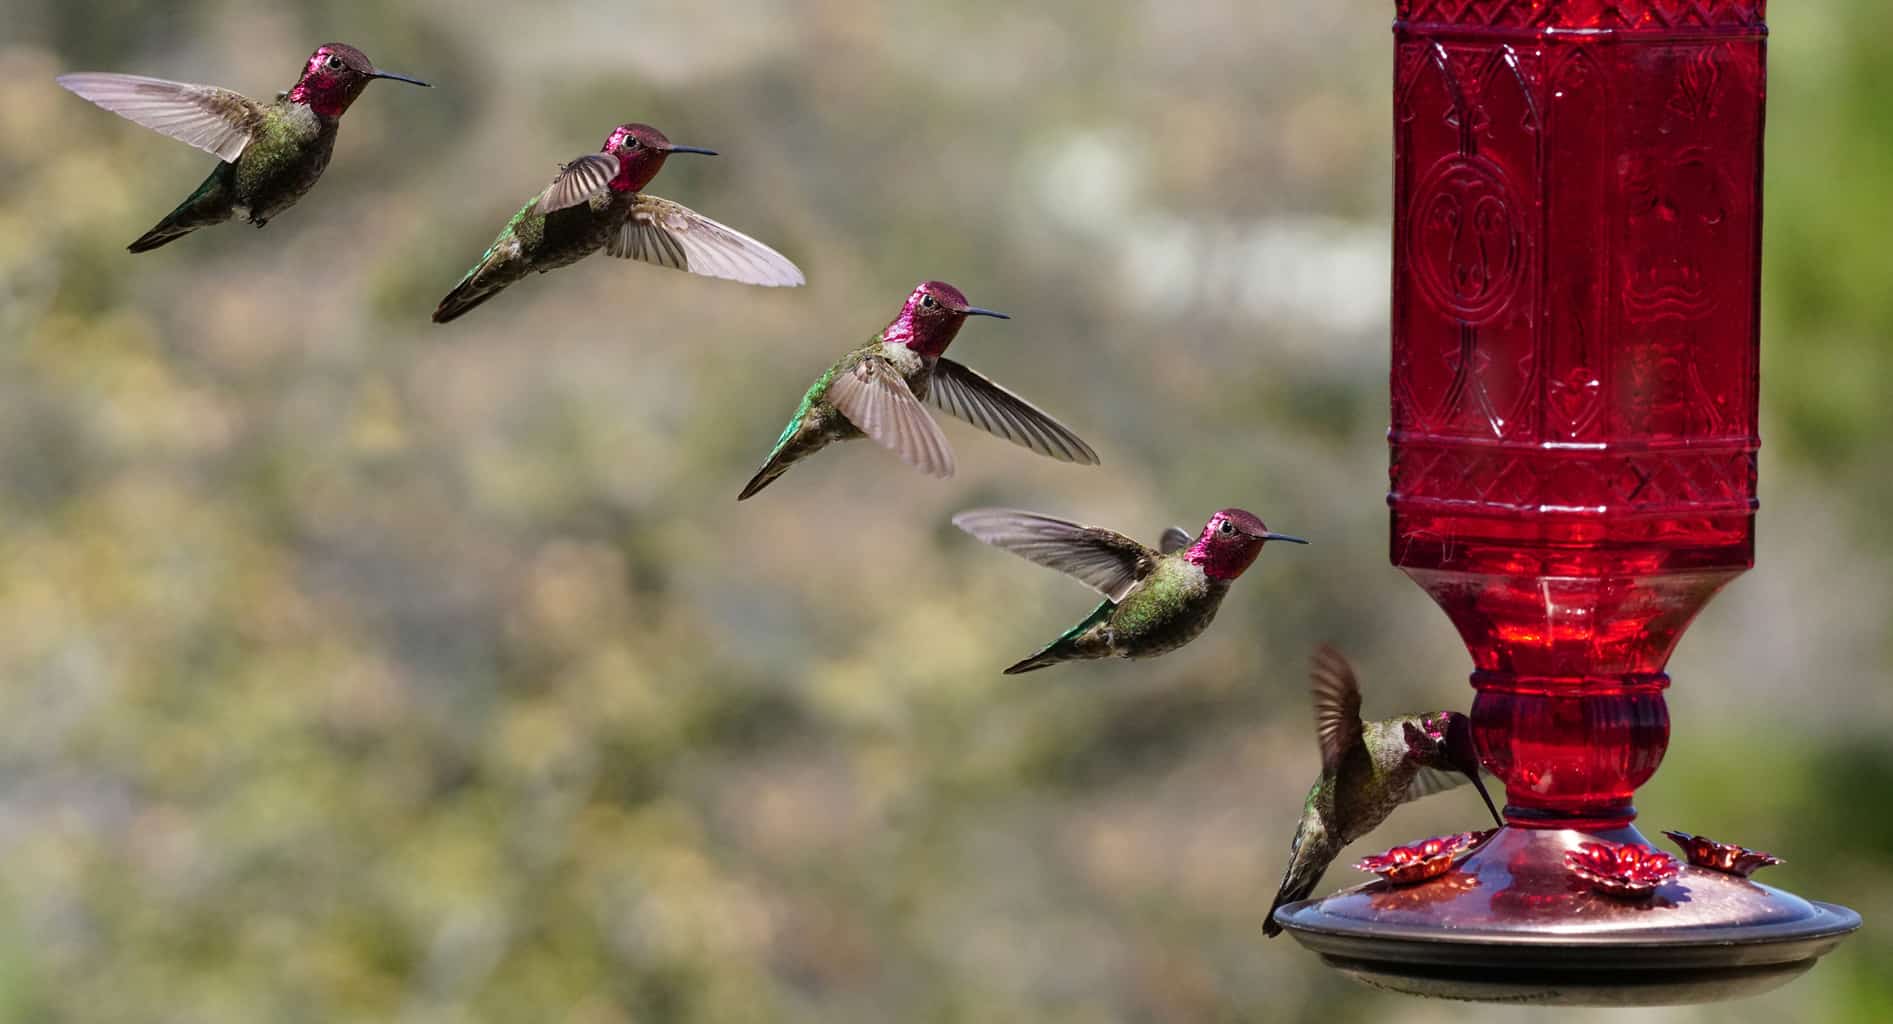 5 quick tips to remember when positioning your hummingbird feeder